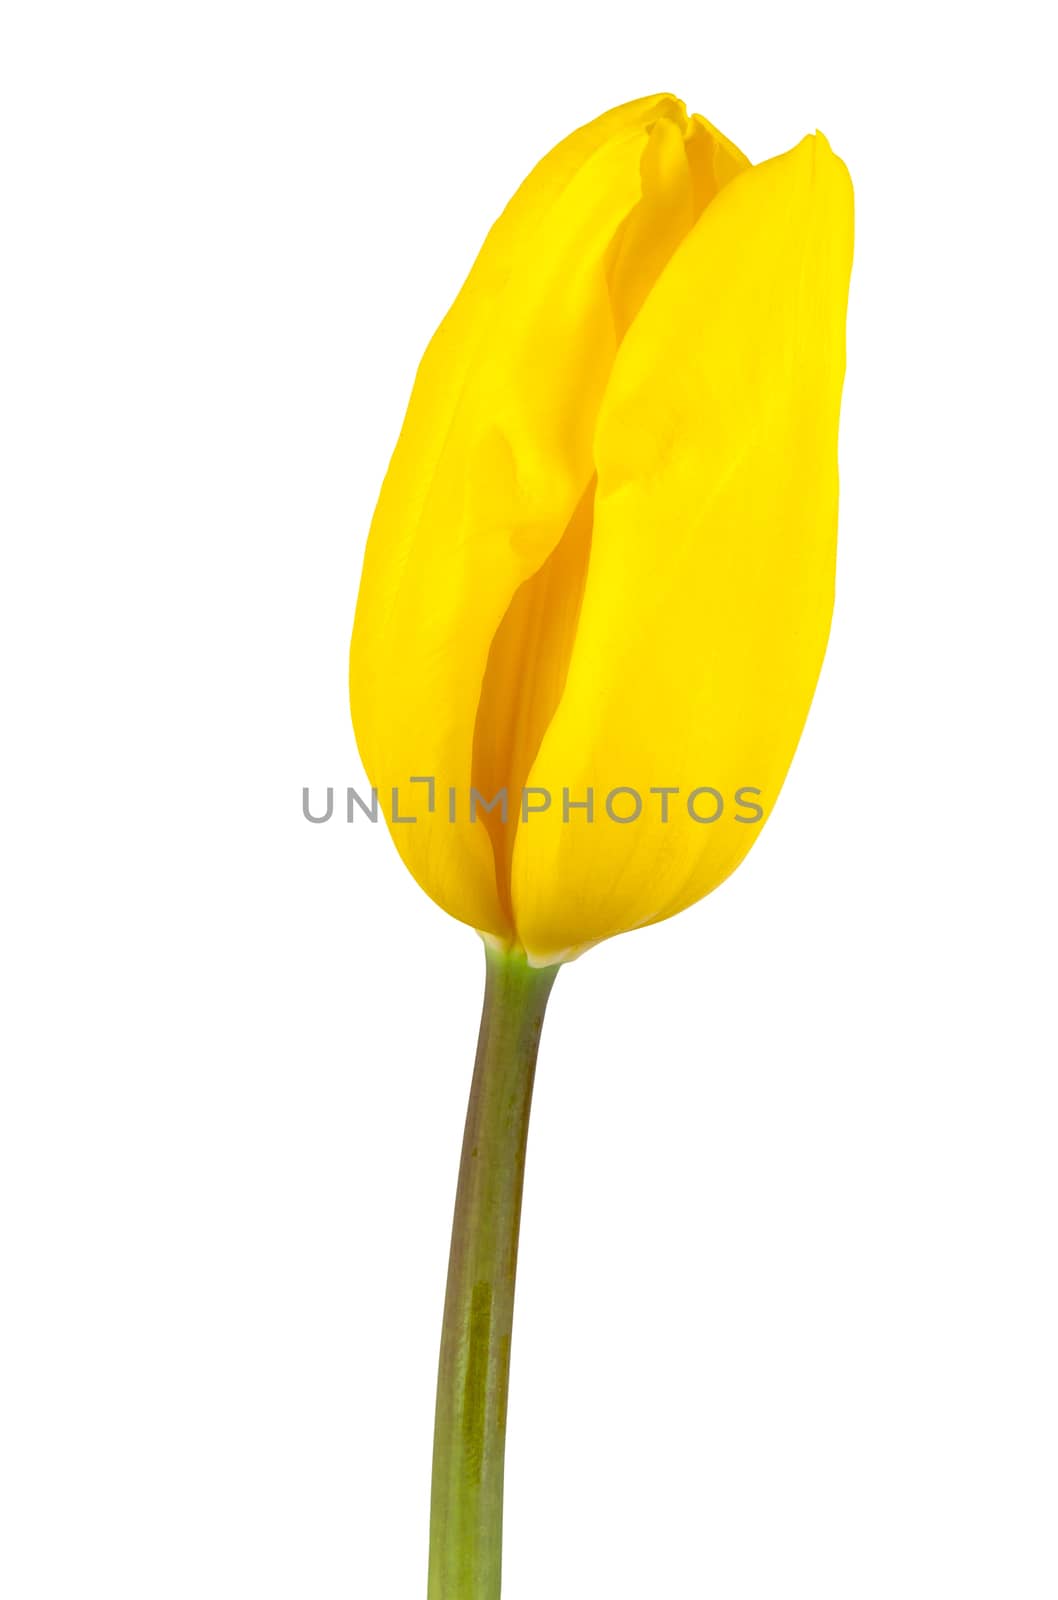 Yellow tulip on white background by mkos83